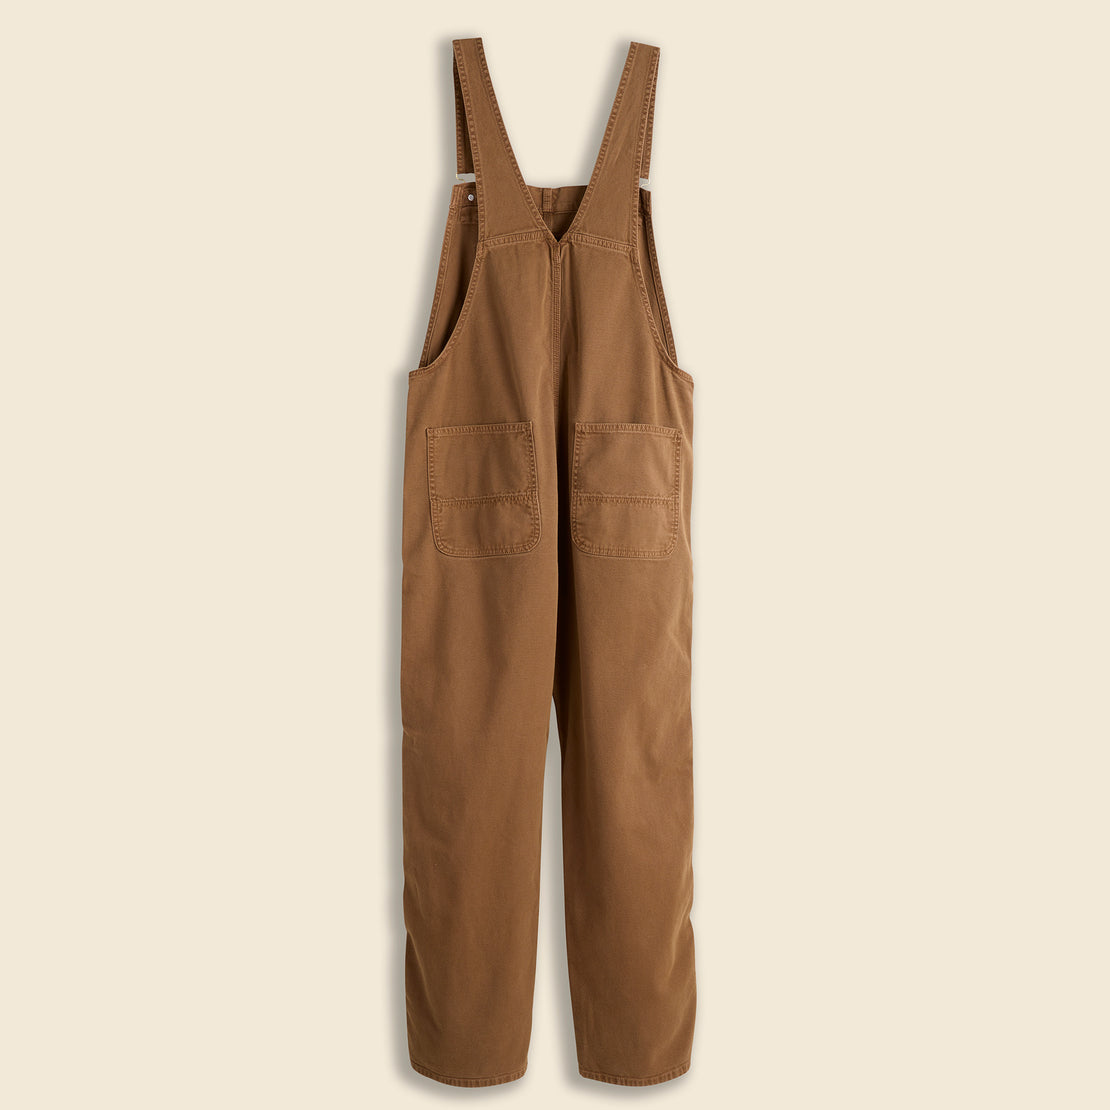 Bib Overall Straight - Tamarind Faded - Carhartt WIP - STAG Provisions - W - Onepiece - Overalls